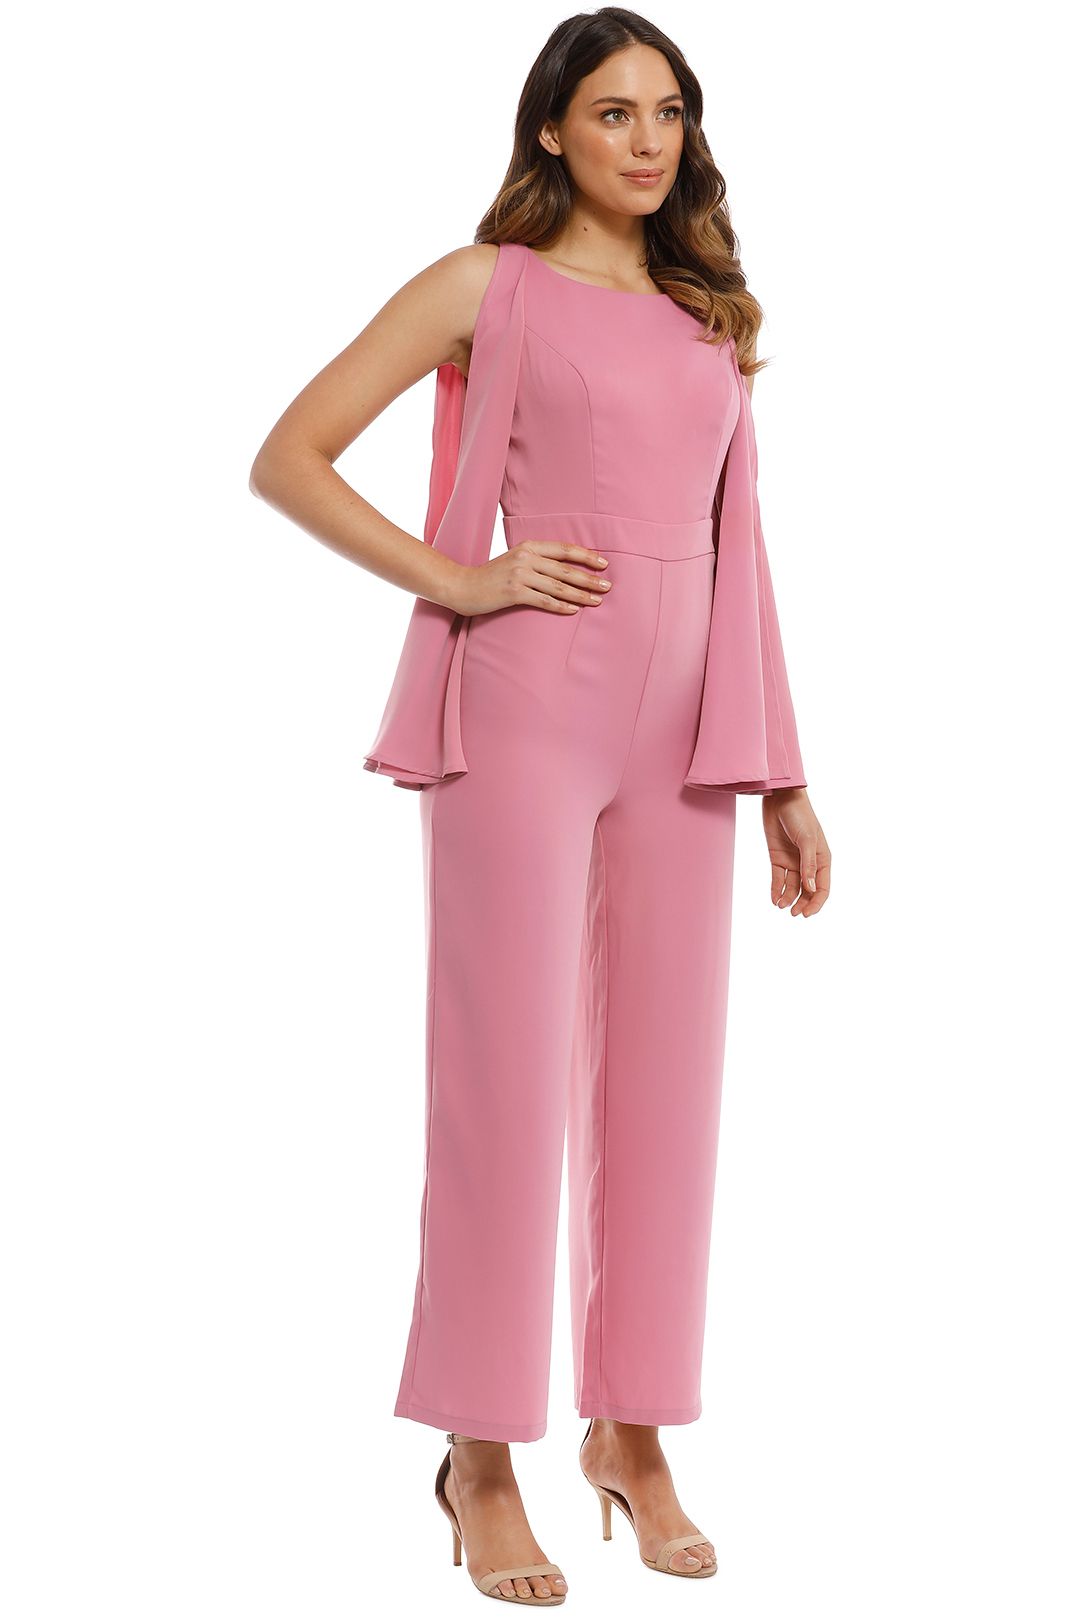 Mossman - Go With The Flow Jumpsuit - Pink Musk - Side